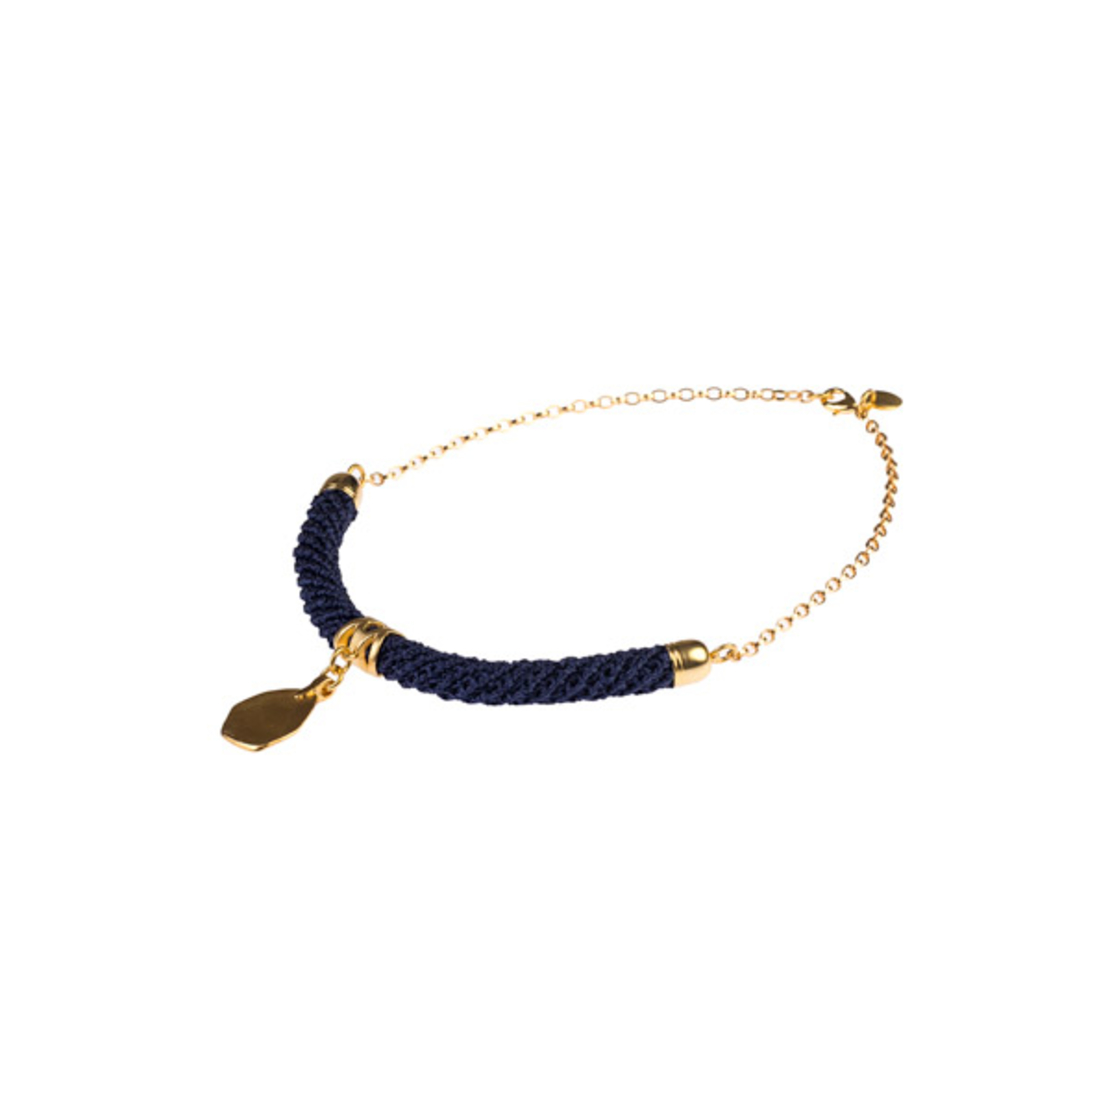 Blue-purple color with a special asymmetrical pendant plated in gold | Adi